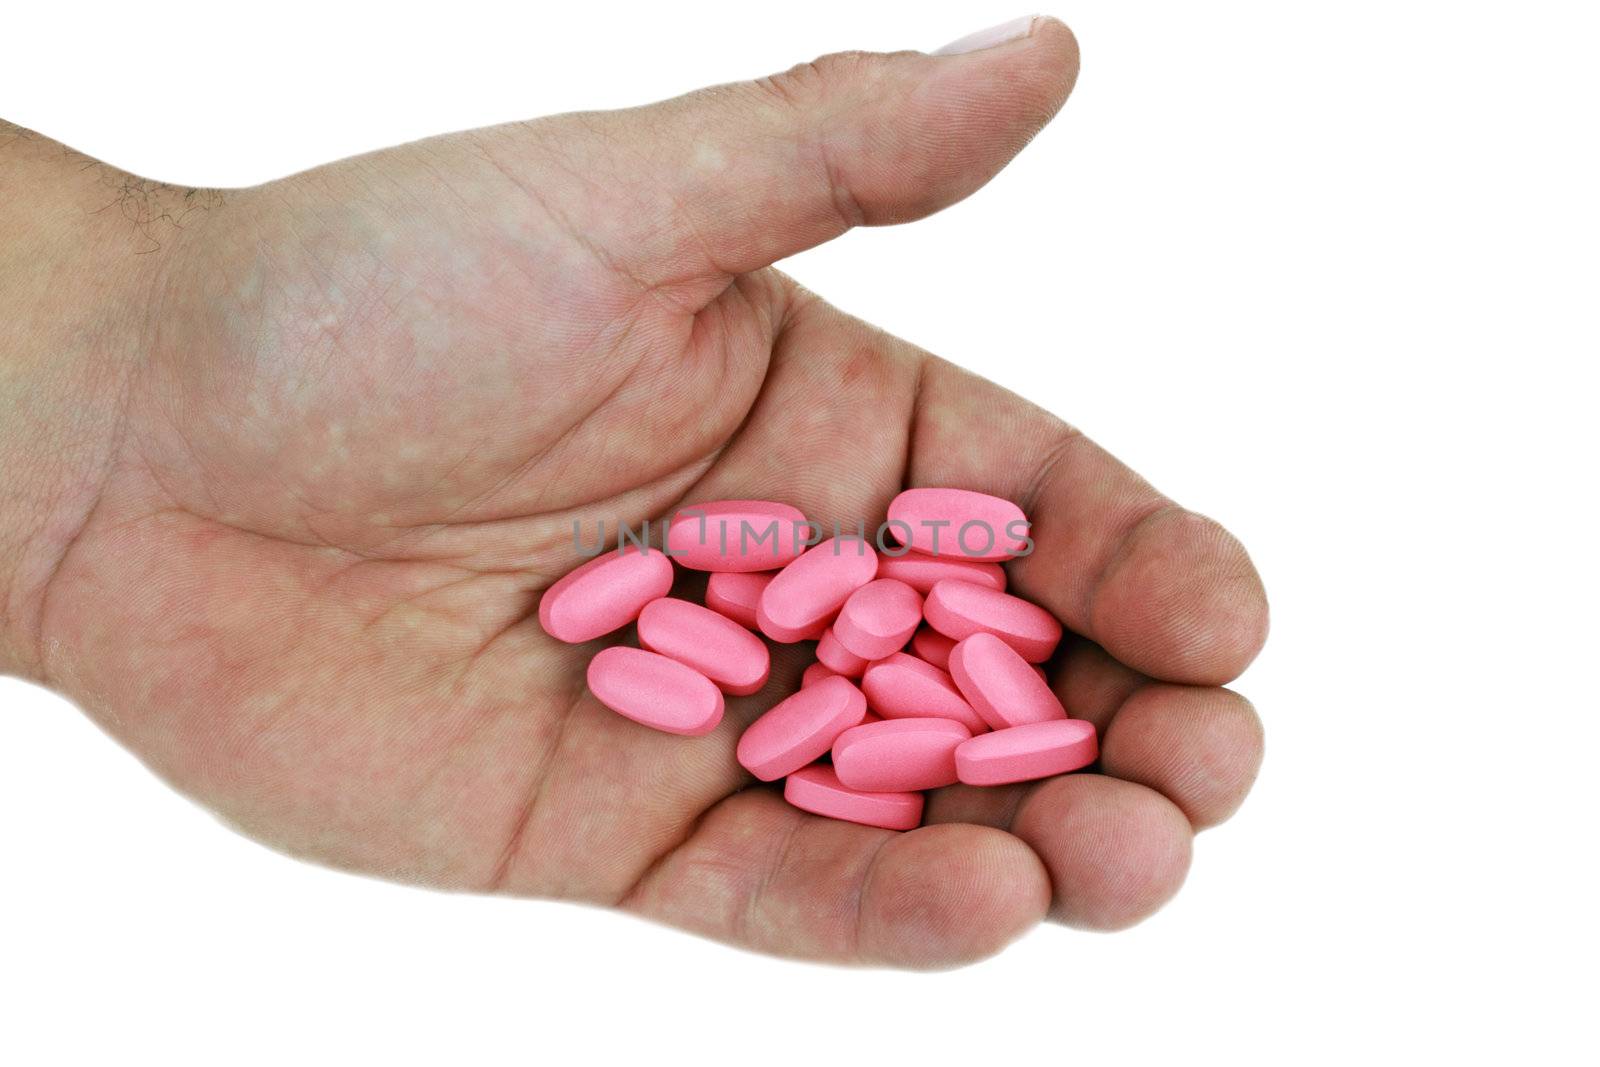 Male hand filled with perscription pain pills isolated on white with clipping path included.